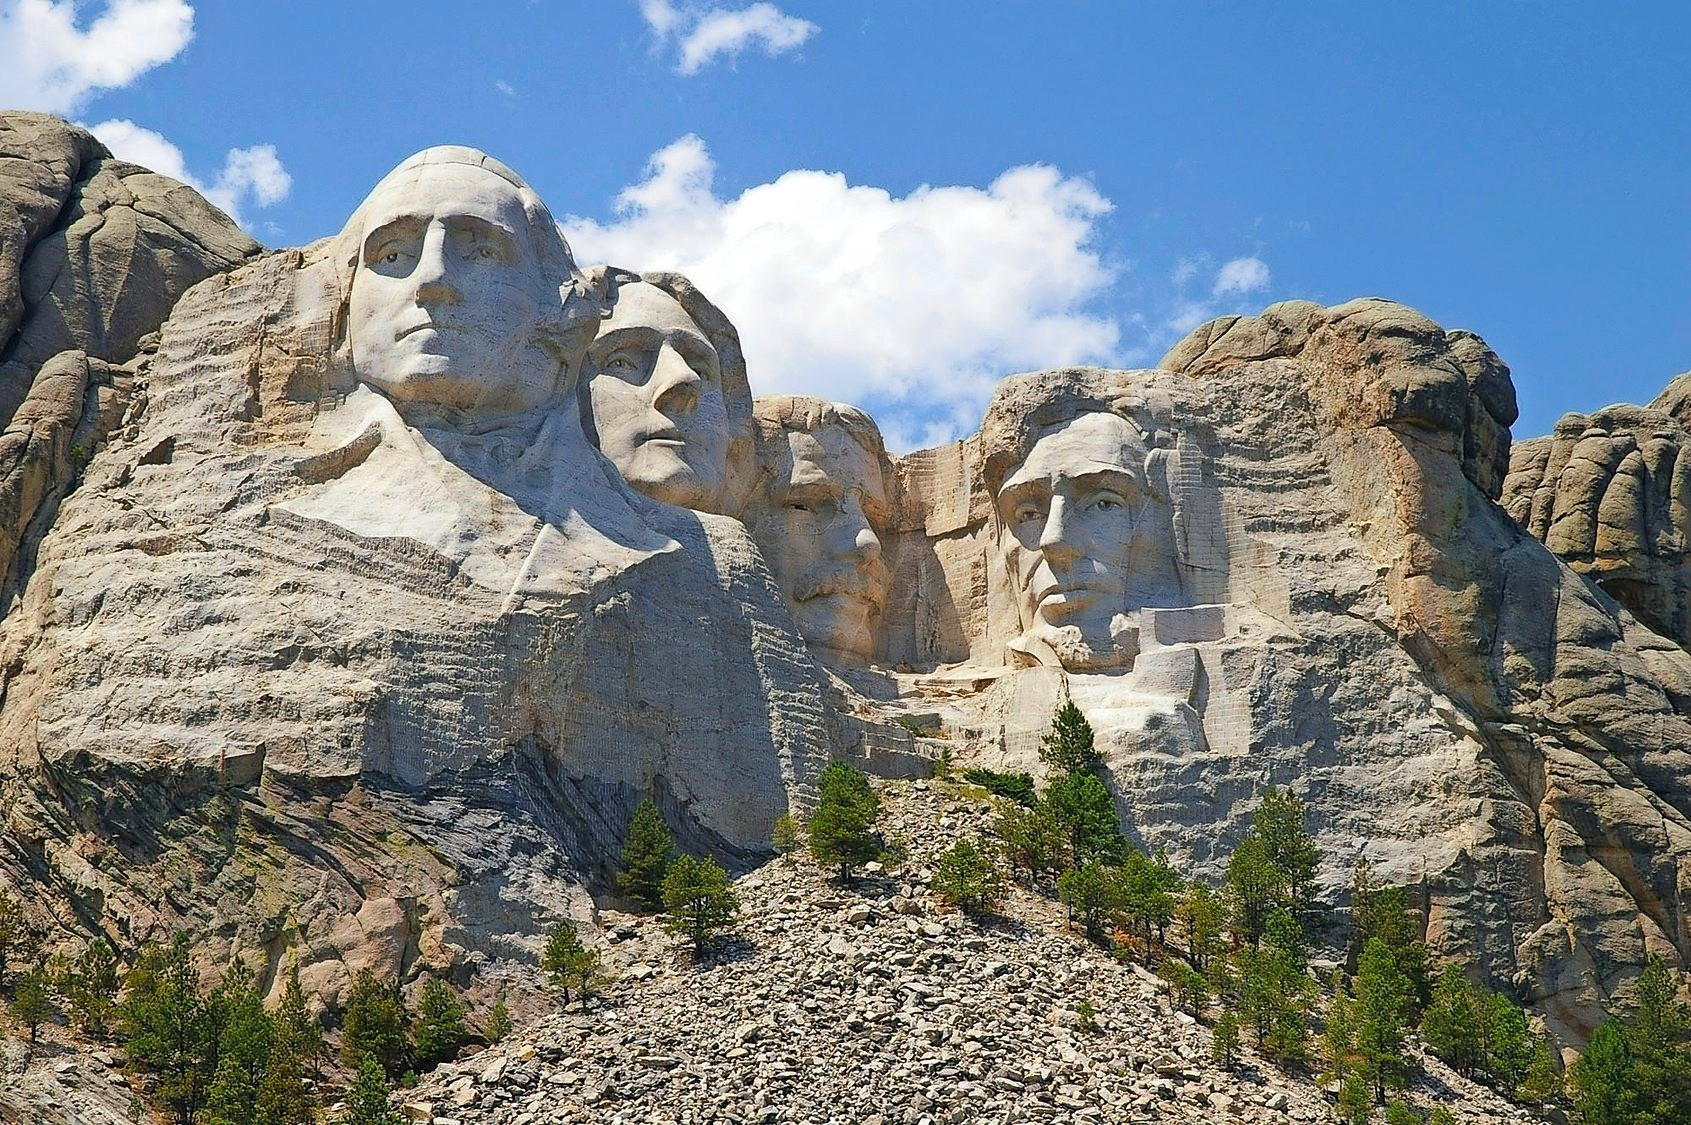 This July 18, 2006 photo shows Mount Rushmore National Memorial near Keystone, S.D.  Mount Rushmore National Memorial features sculptures of the former United States presidents, from left to right, George Washington, Thomas Jefferson, Theodore Roosevelt and Abraham Lincoln.  (AP Photo/Dirk Lammers) US SOUTH DAKOTA MOUNT RUSHMORE